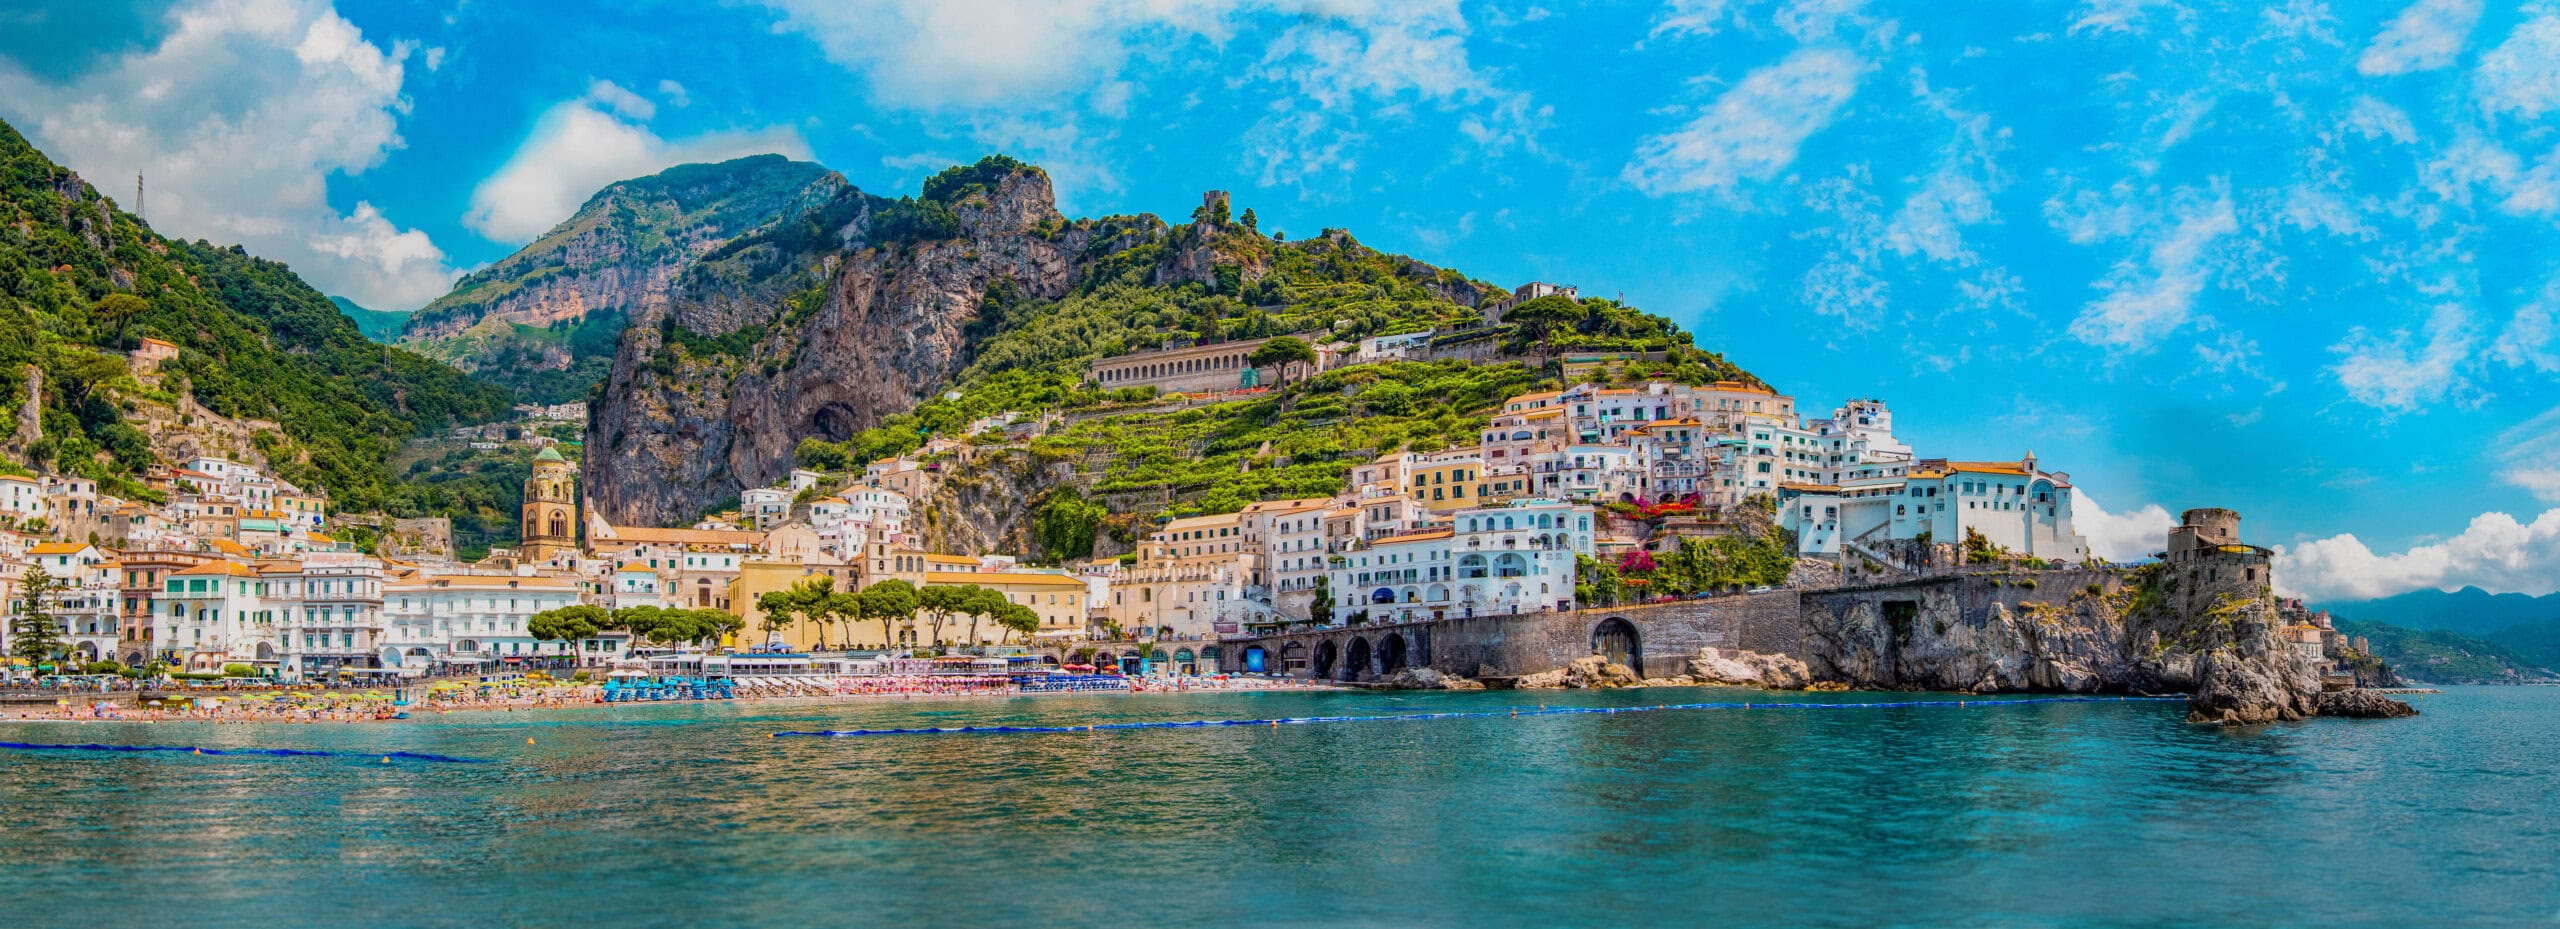 Capri, Famous Vacation Spot, Touched by Coronavirus - The New York